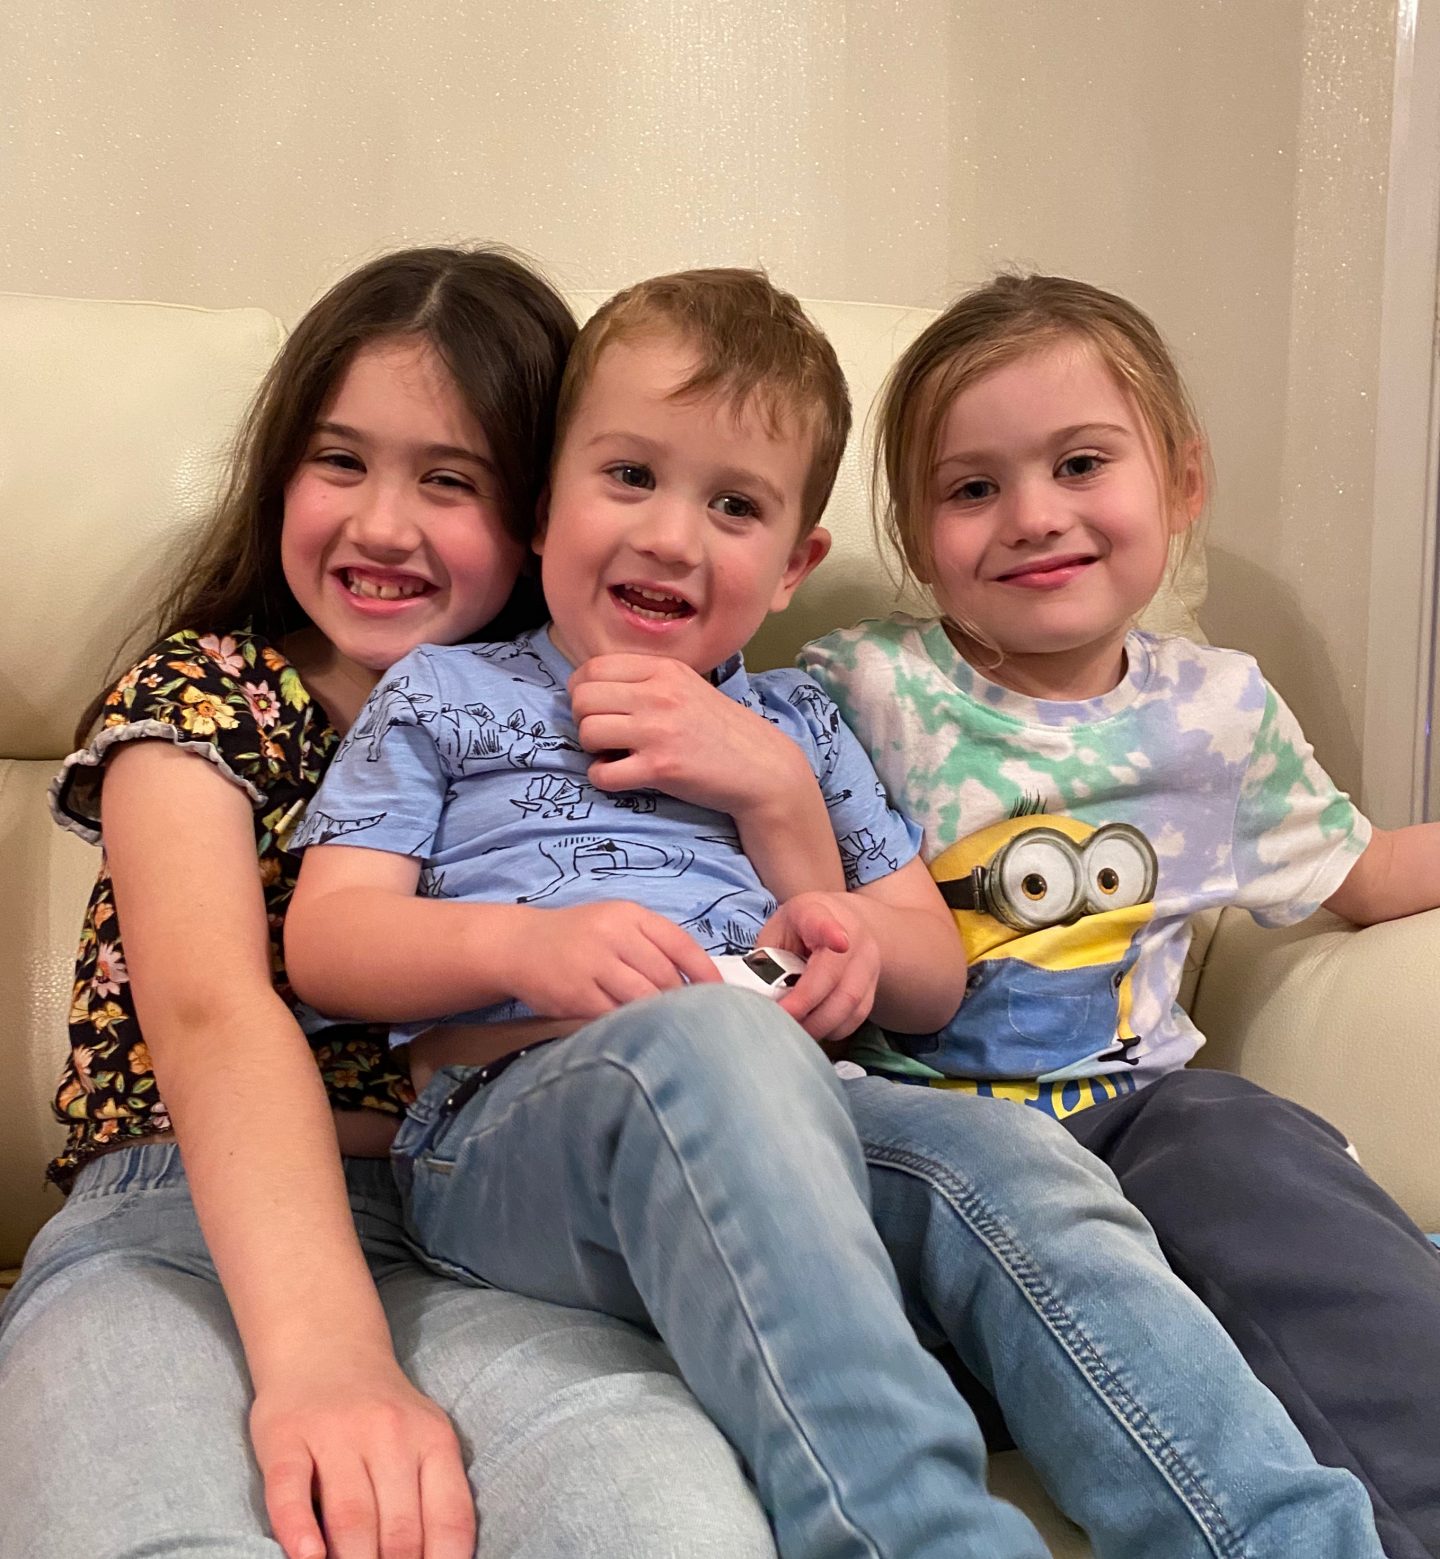 three siblings - two girls and a boy